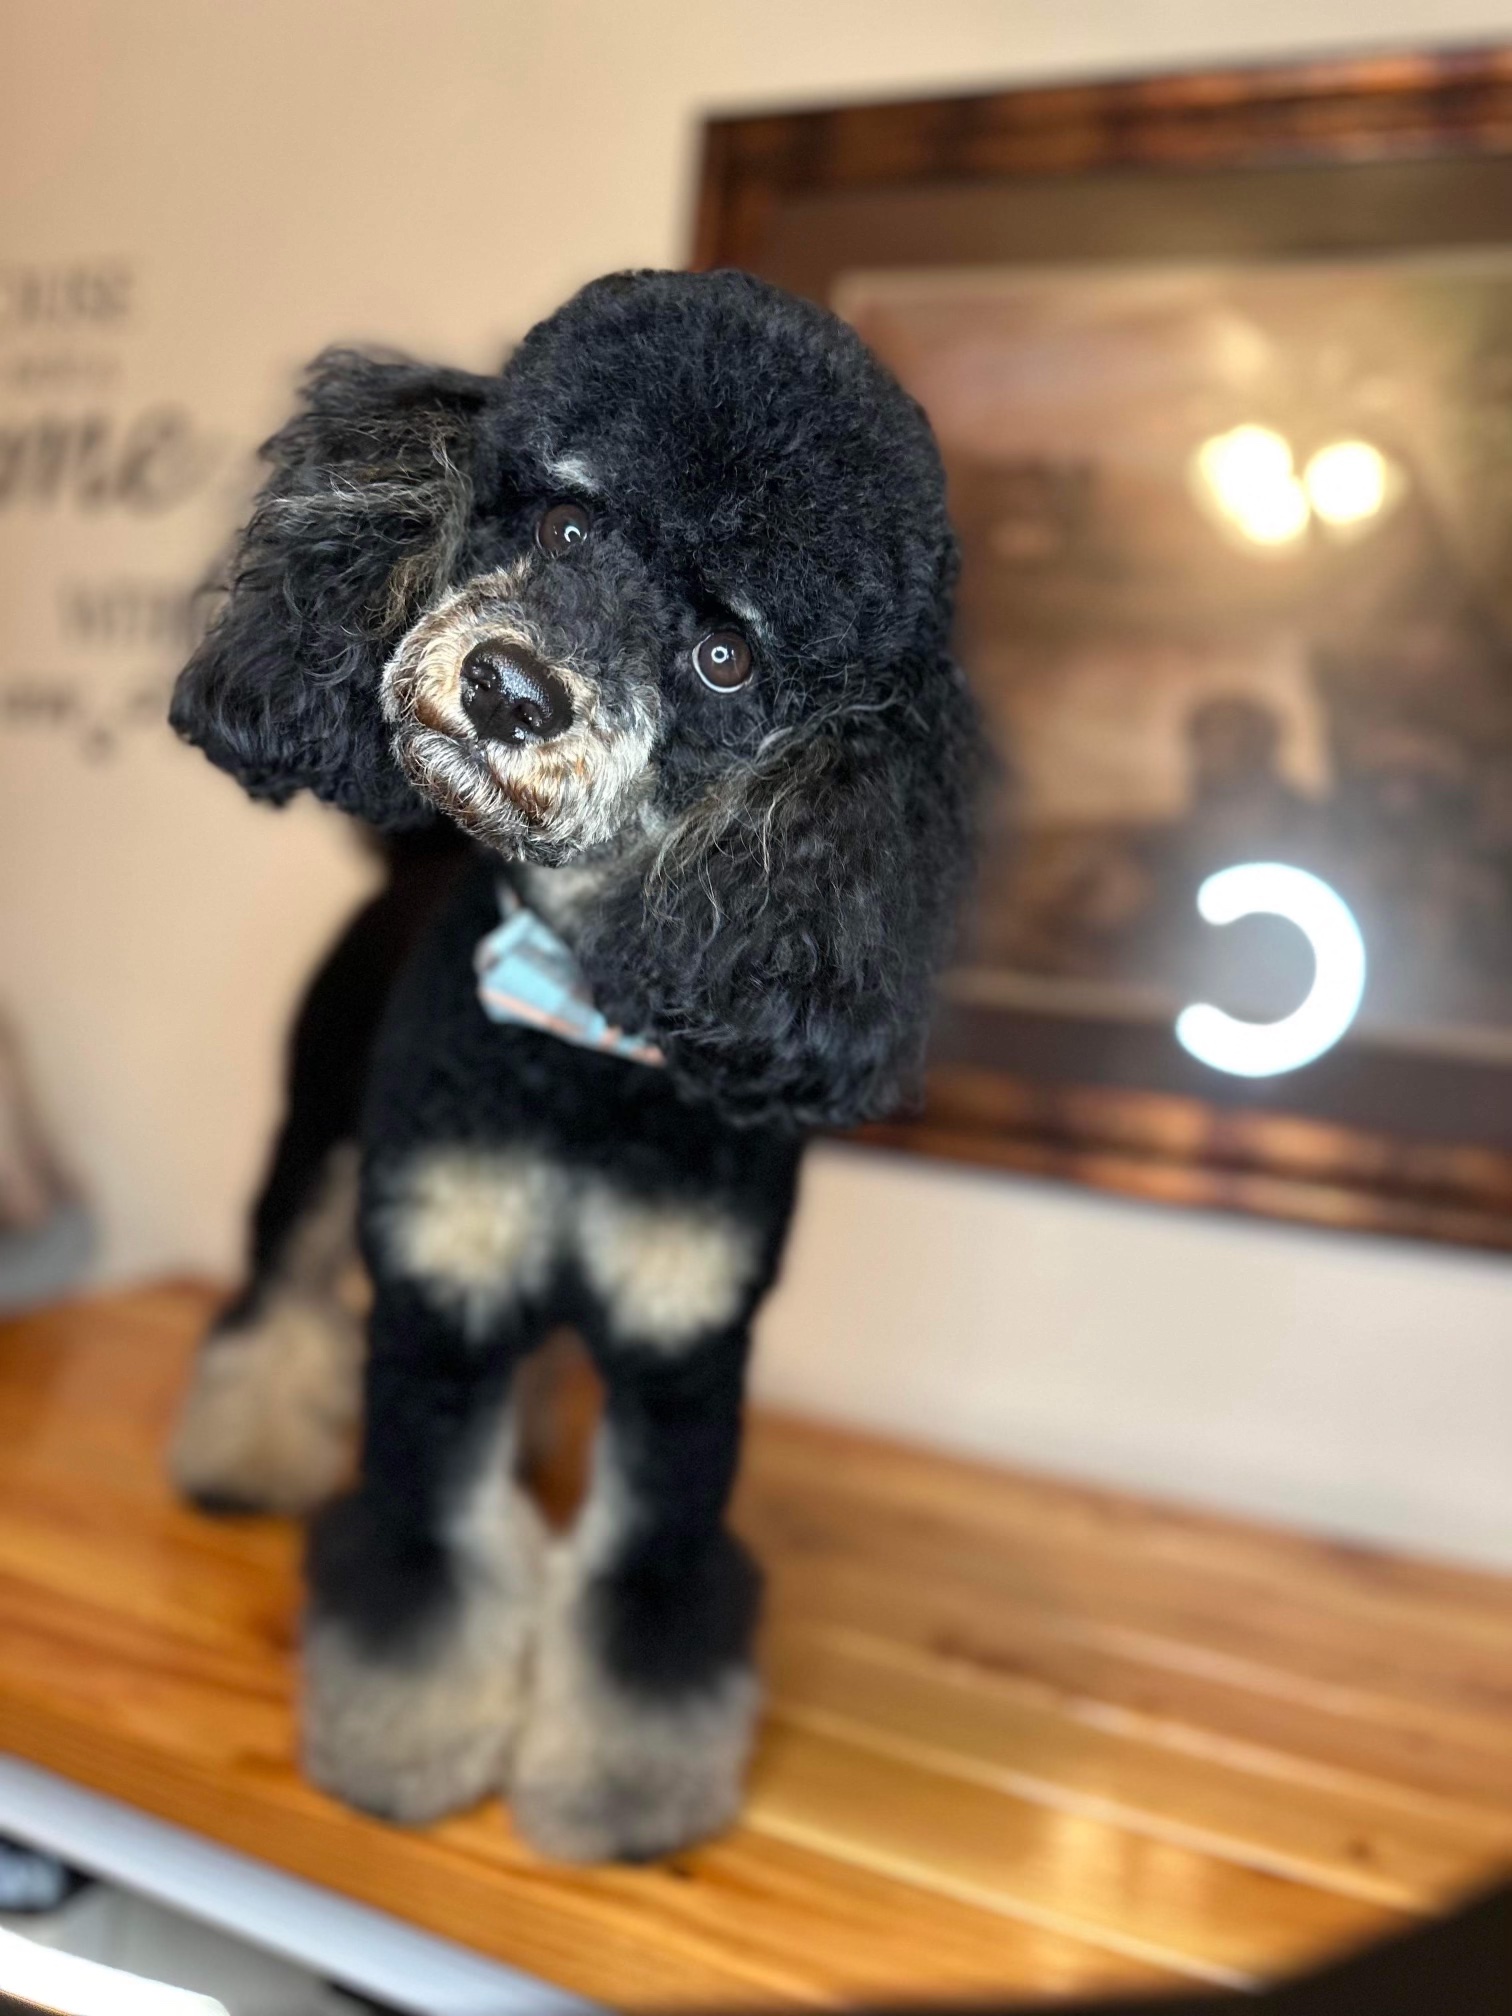 Dobby the parti standard poodle